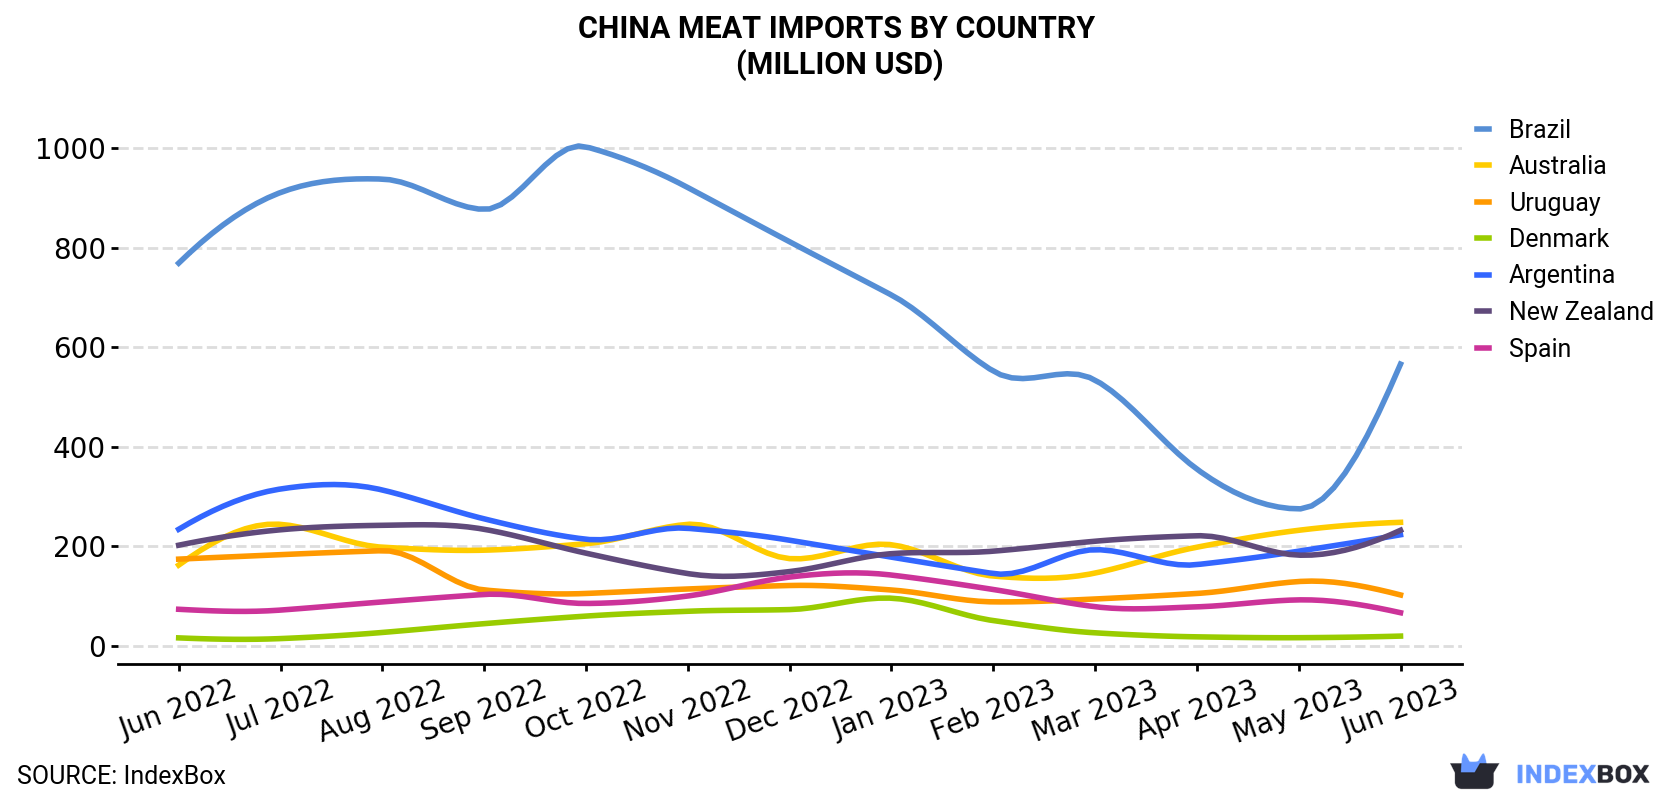 China Meat Imports By Country (Million USD)